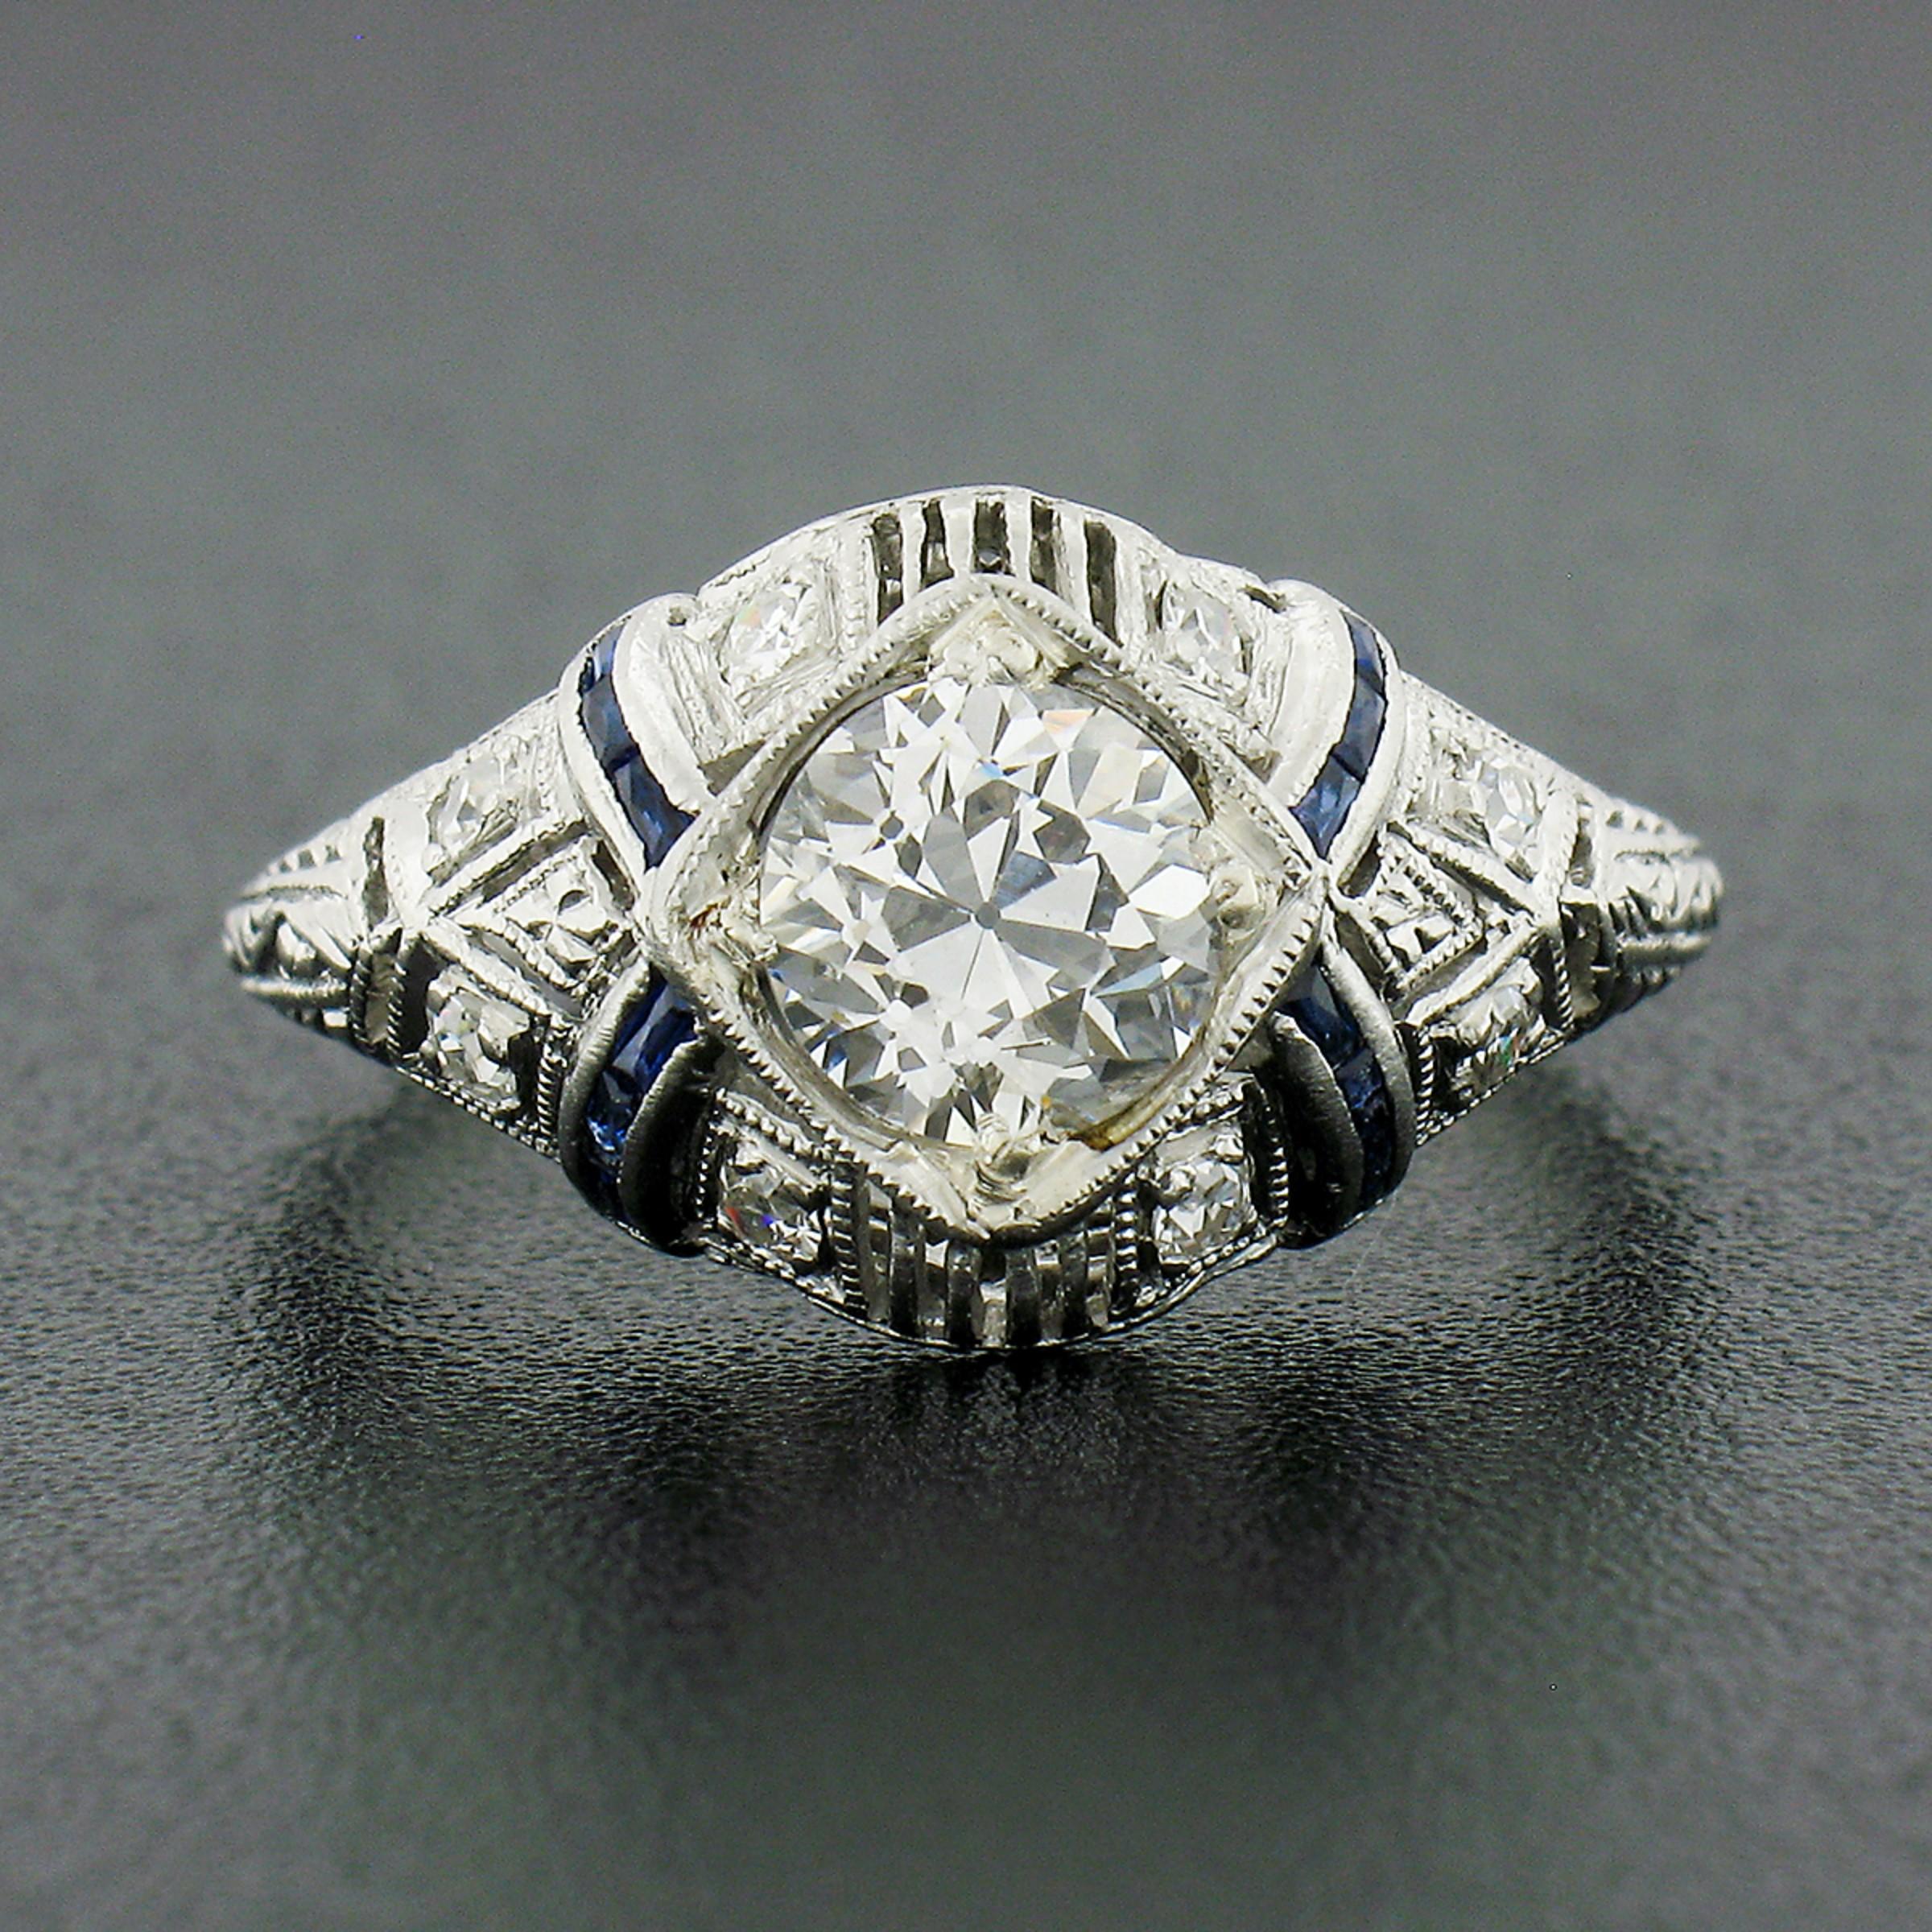 Here we have an absolutely gorgeous antique ring that was crafted from solid platinum during the art deco period. This ring features a, GIA certified, old European cut diamond neatly set at the center of the puffed top and shows a large attractive